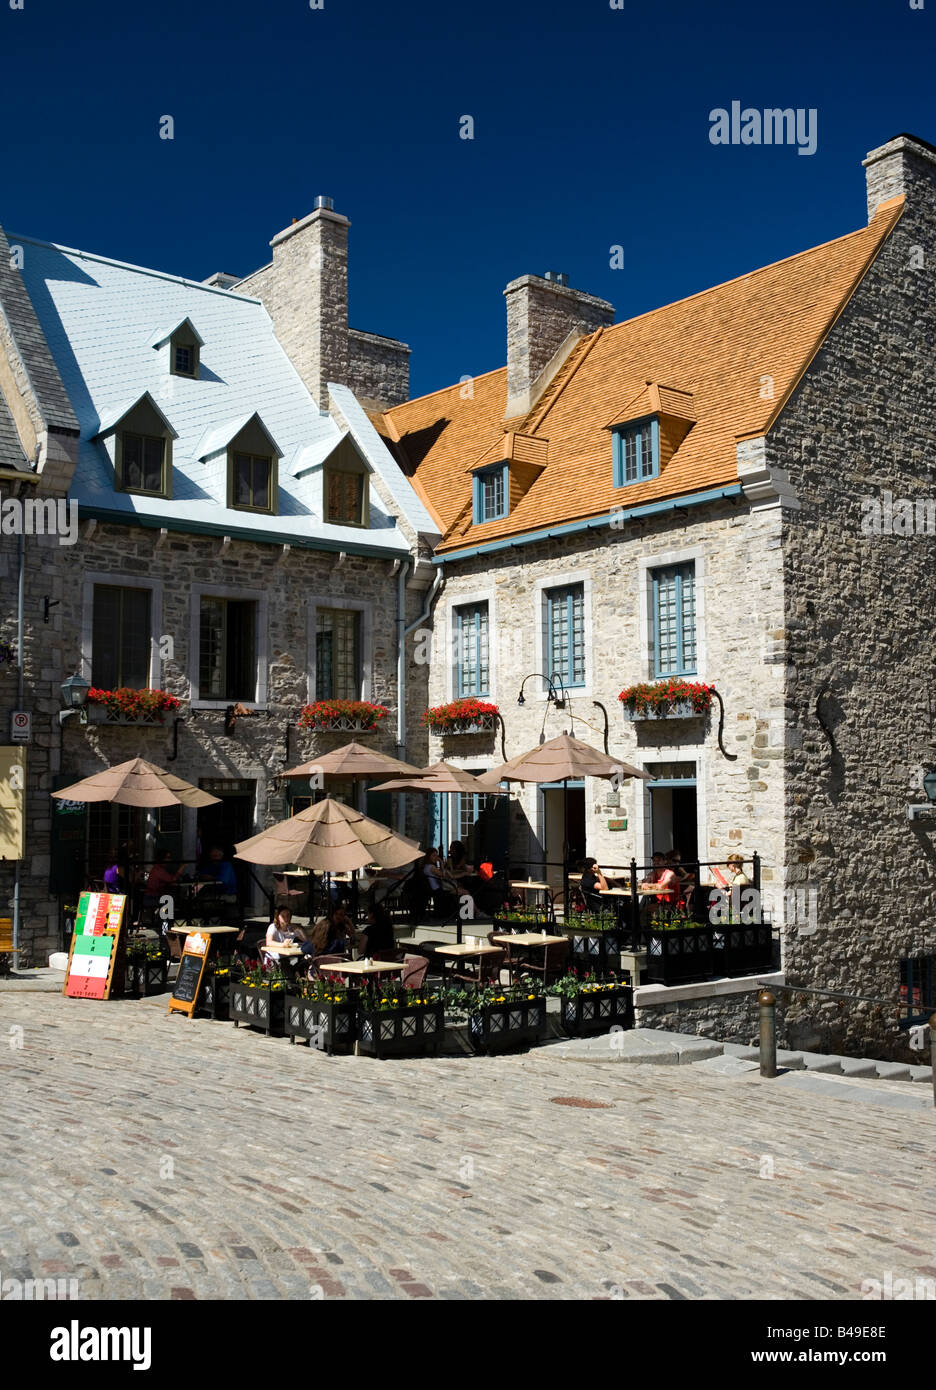 Old stone buildings in Place-Royale in Old Quebec City, Quebec, Canada. Stock Photo